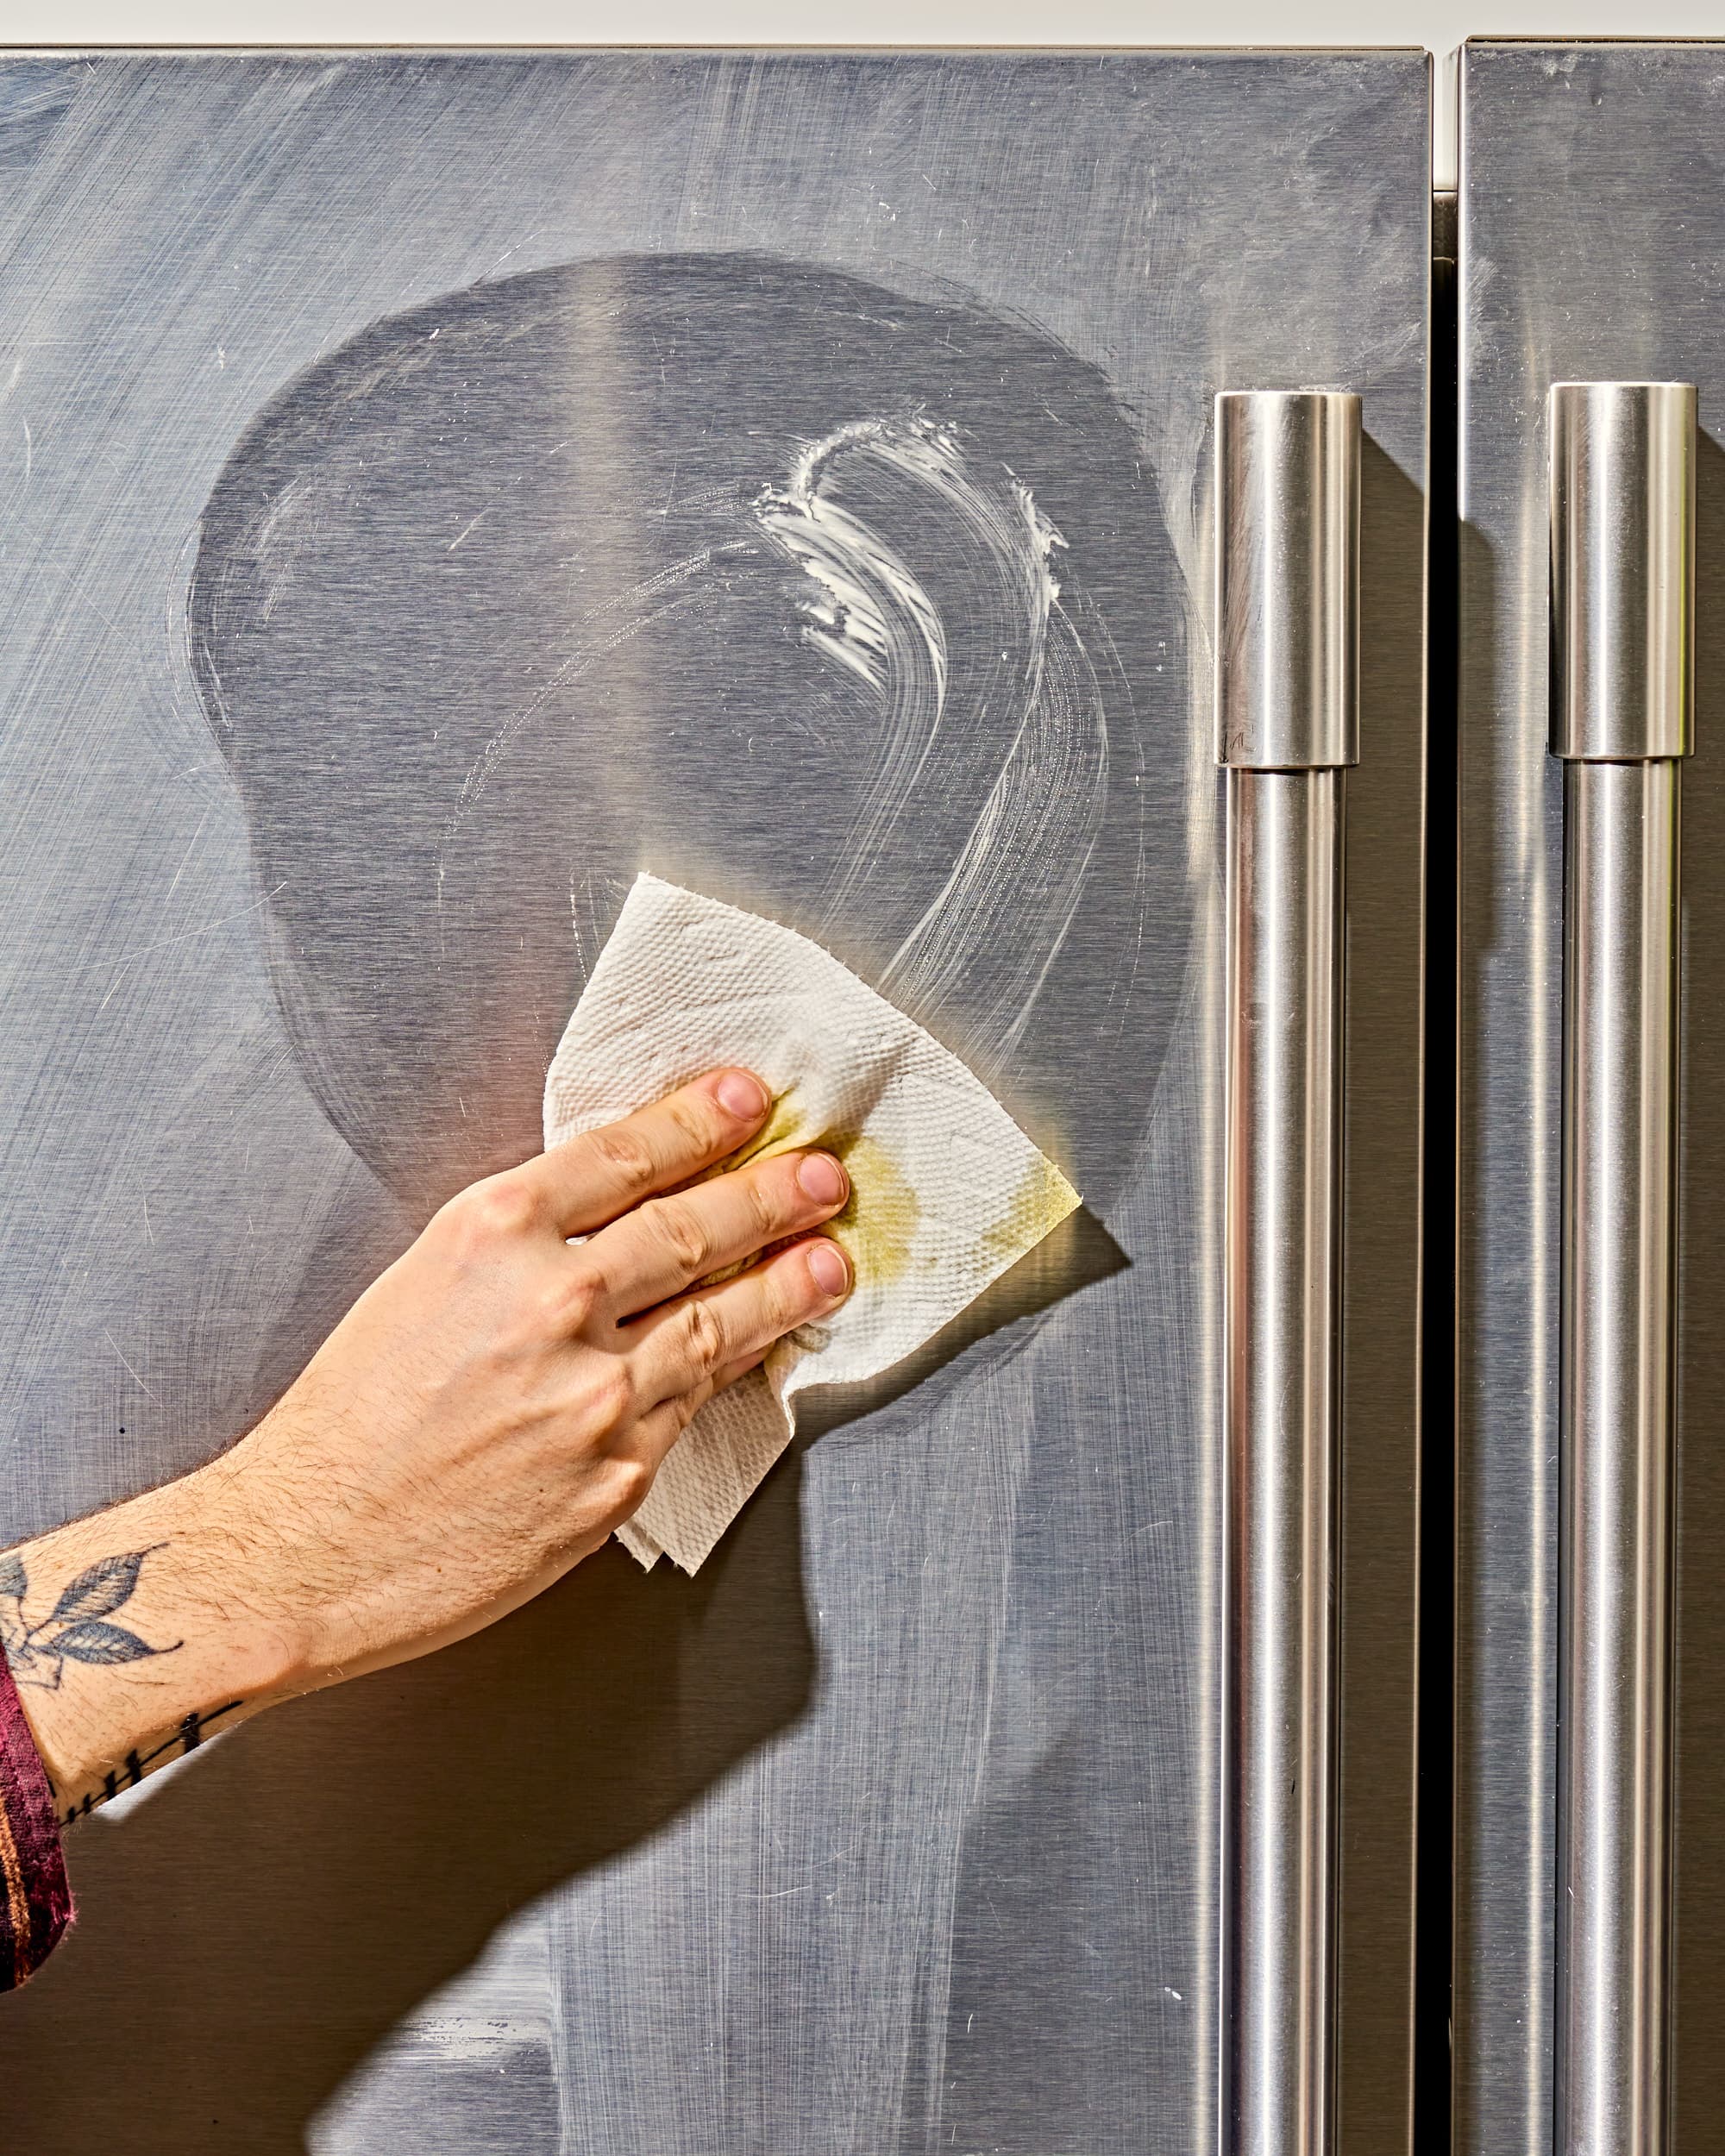 How to Clean Stainless Steel Appliances